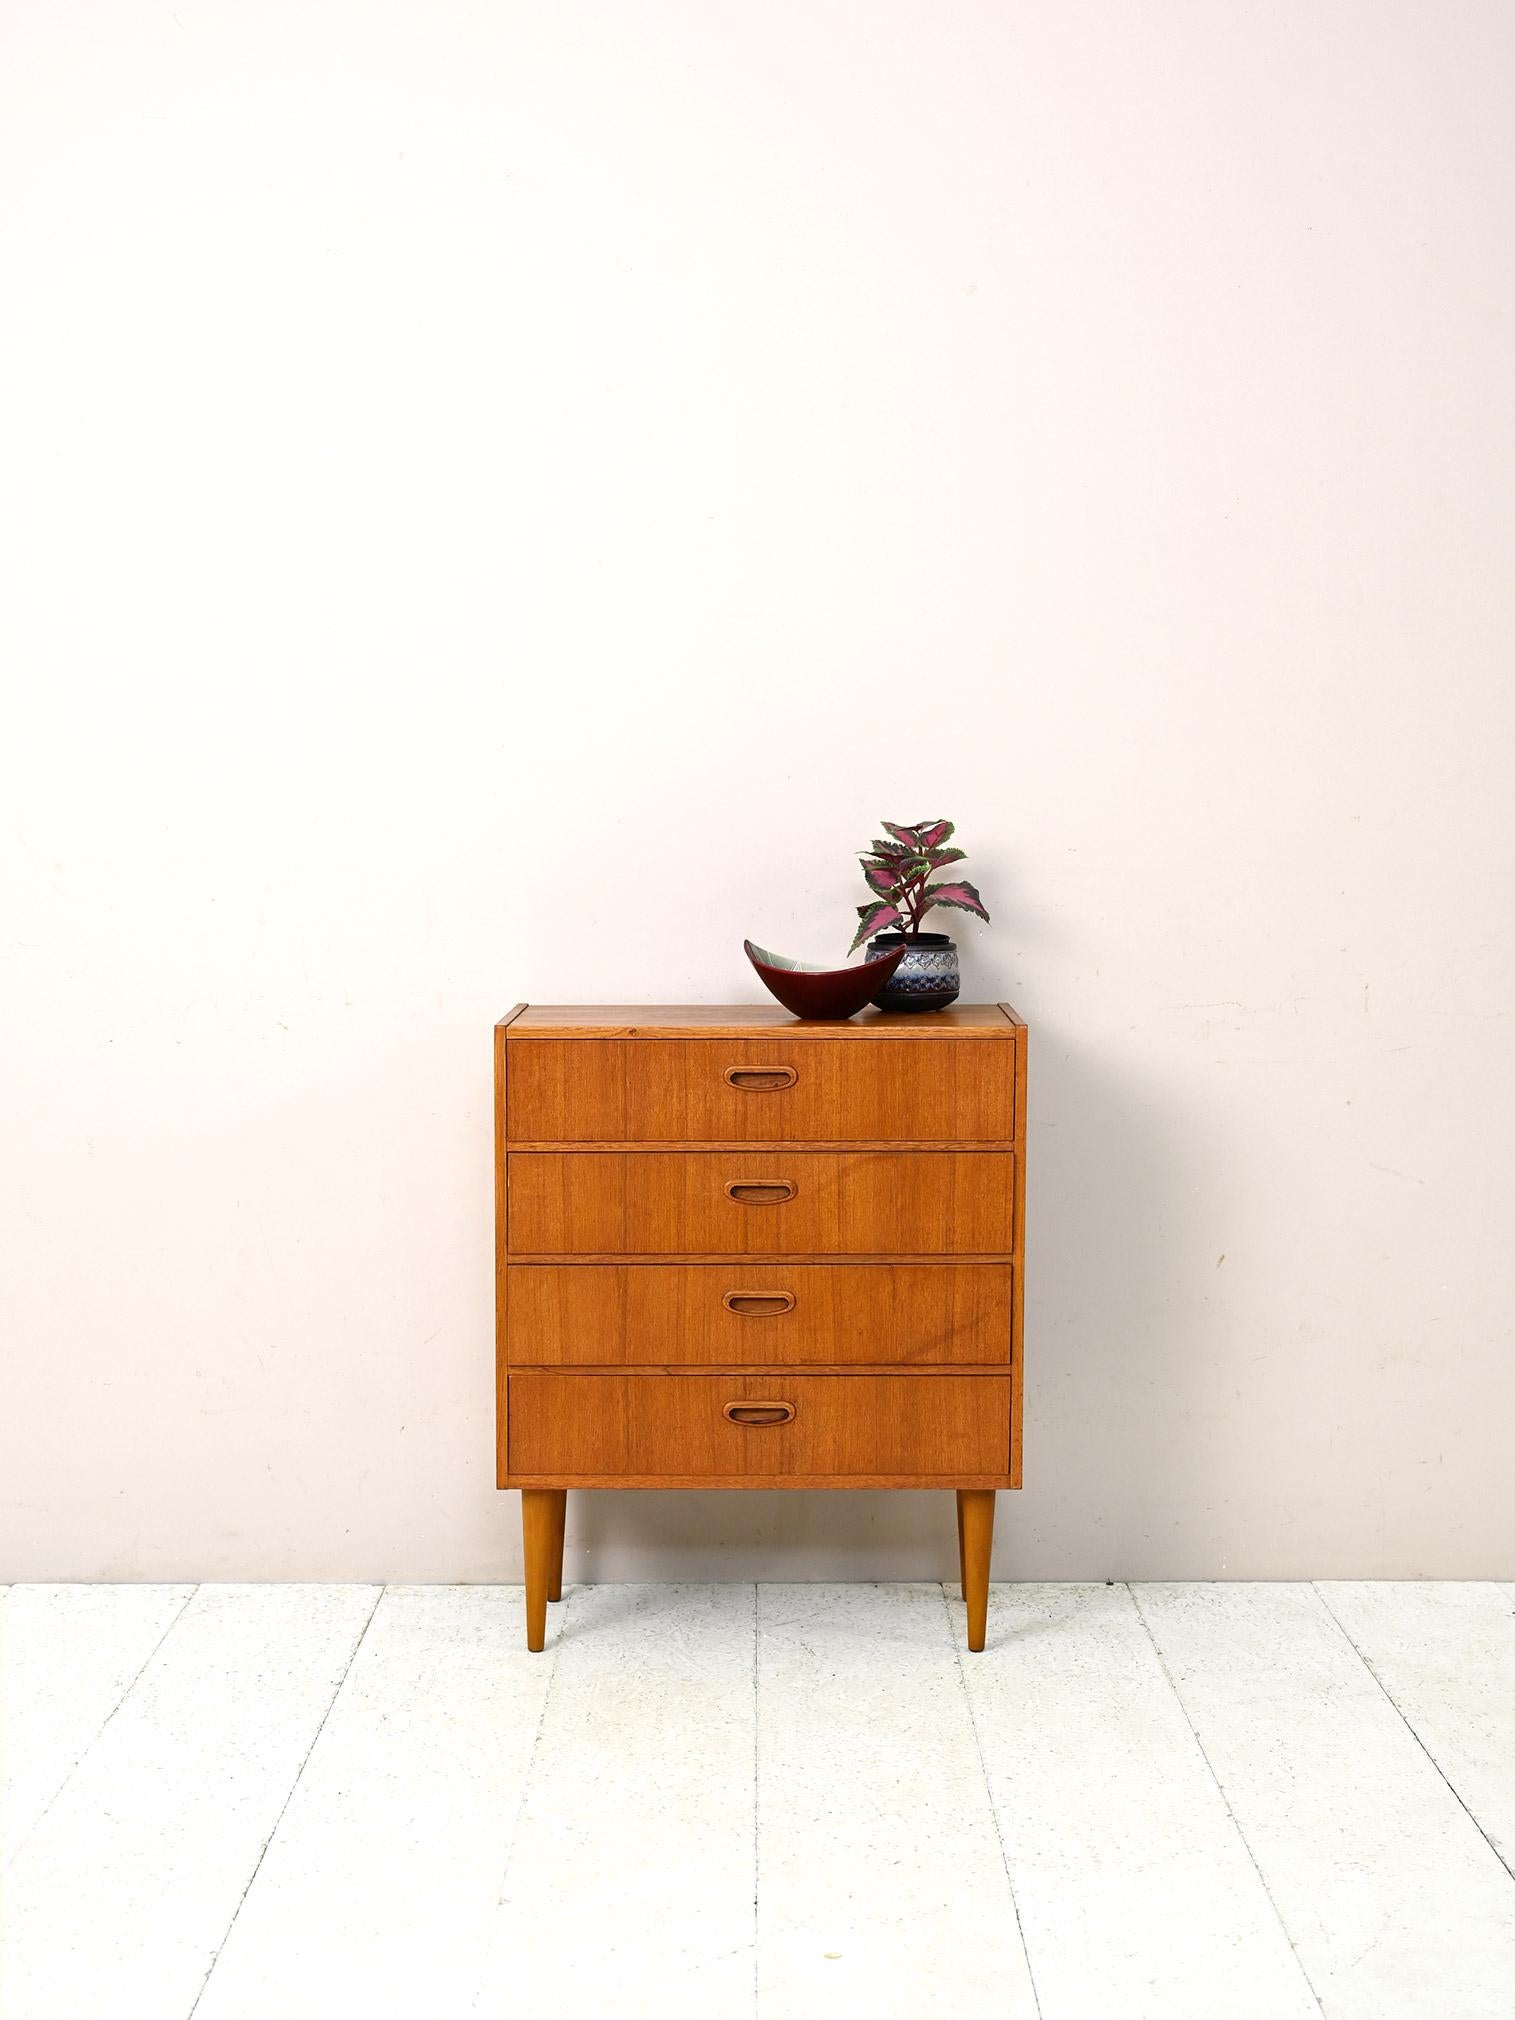 Scandinavian 1960s teak cabinet.

This original midcentury piece of furniture can be used as a nightstand or as an entryway cabinet due to its small size. 
It is characterized by its simple, square lines as opposed to the soft shapes of the